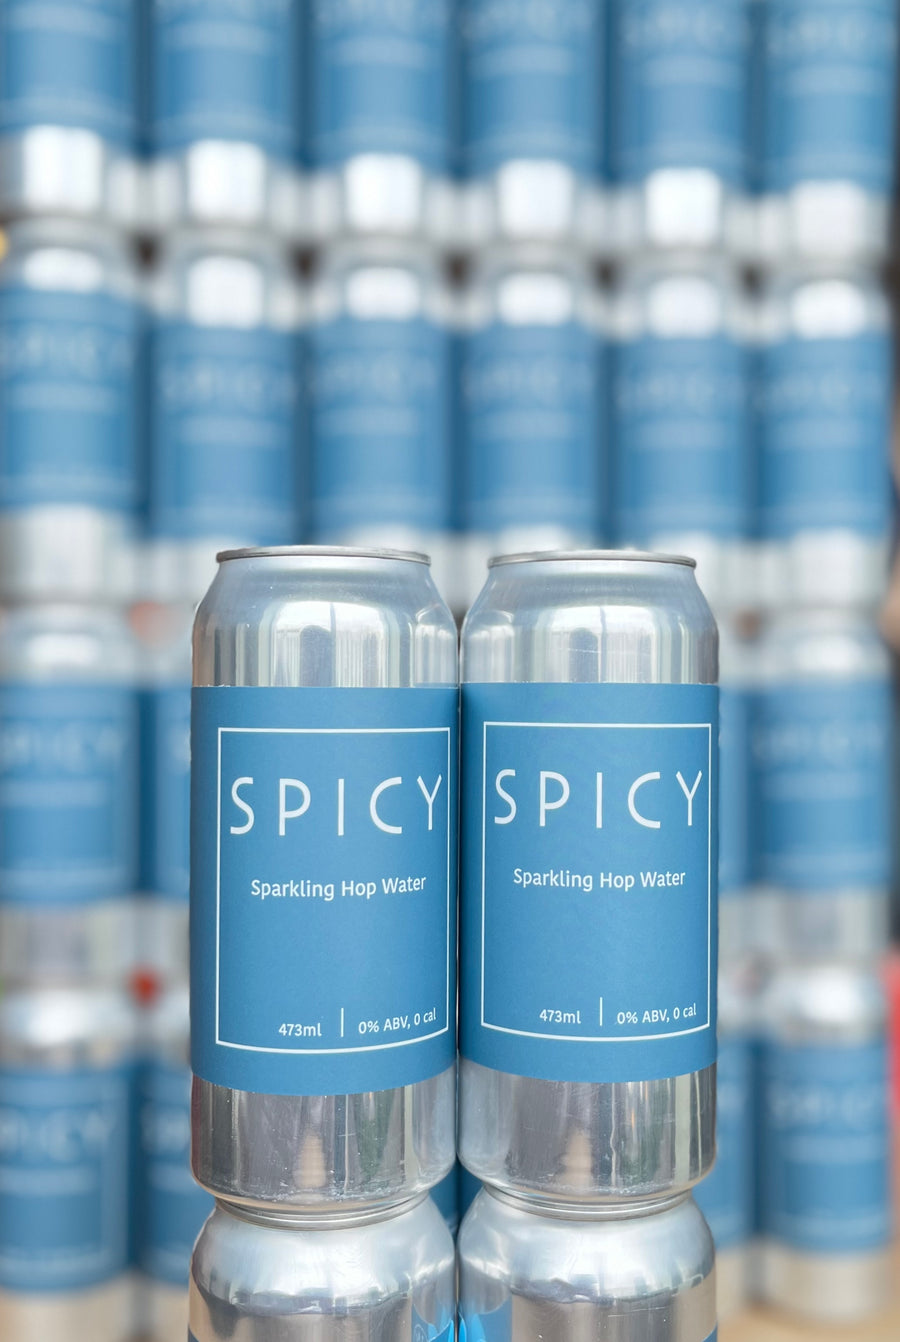 Spicy Sparkling Hop Water - 473ml can